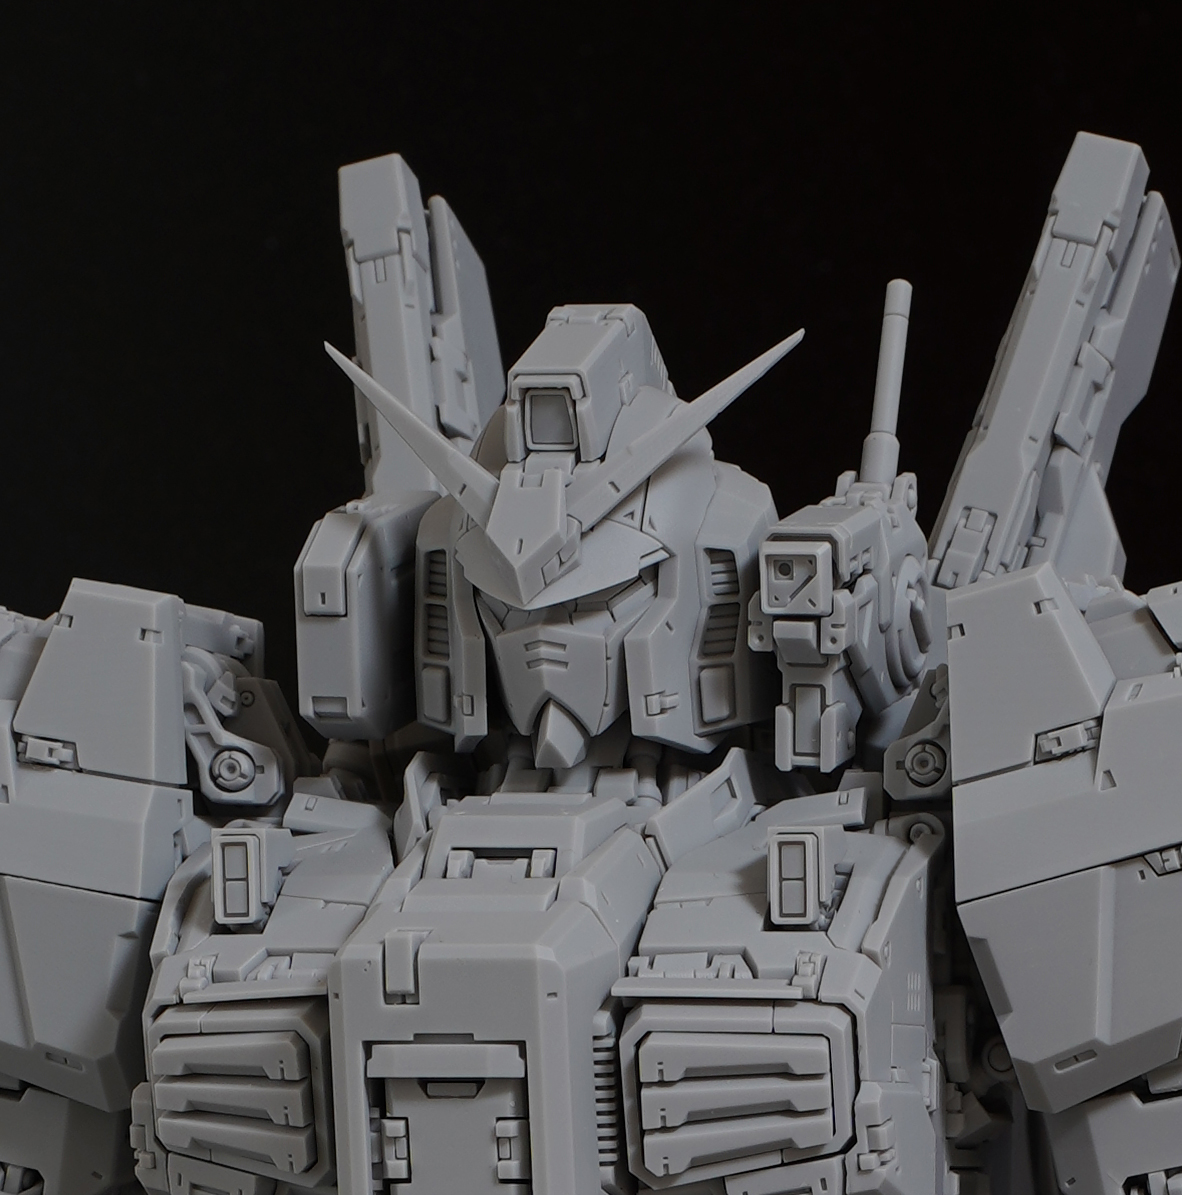 WIP - Calibrate details and proportion - Improved assemblability - Two types of decals (AEUG/Titans) - G-Defenser?